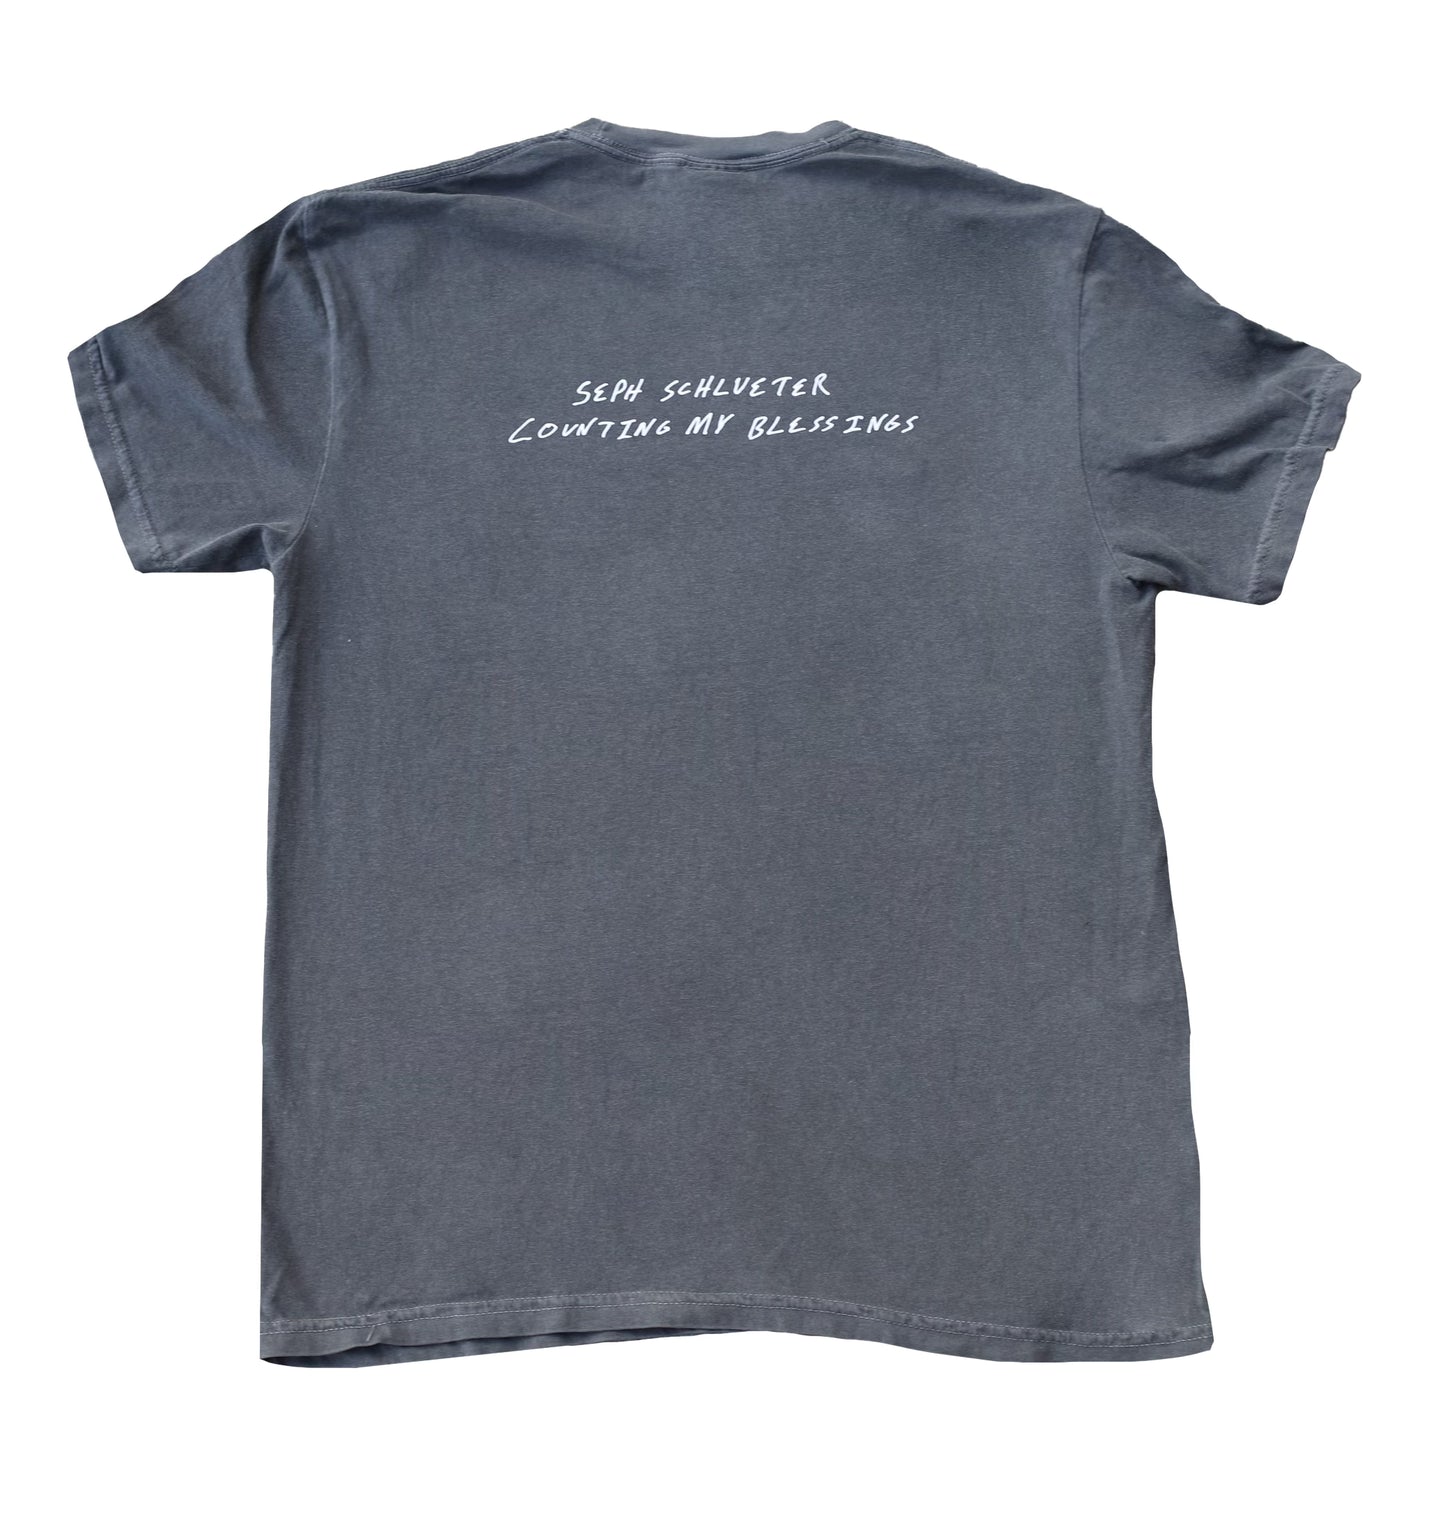 Seph Schlueter "Counting My Blessings" T-Shirt